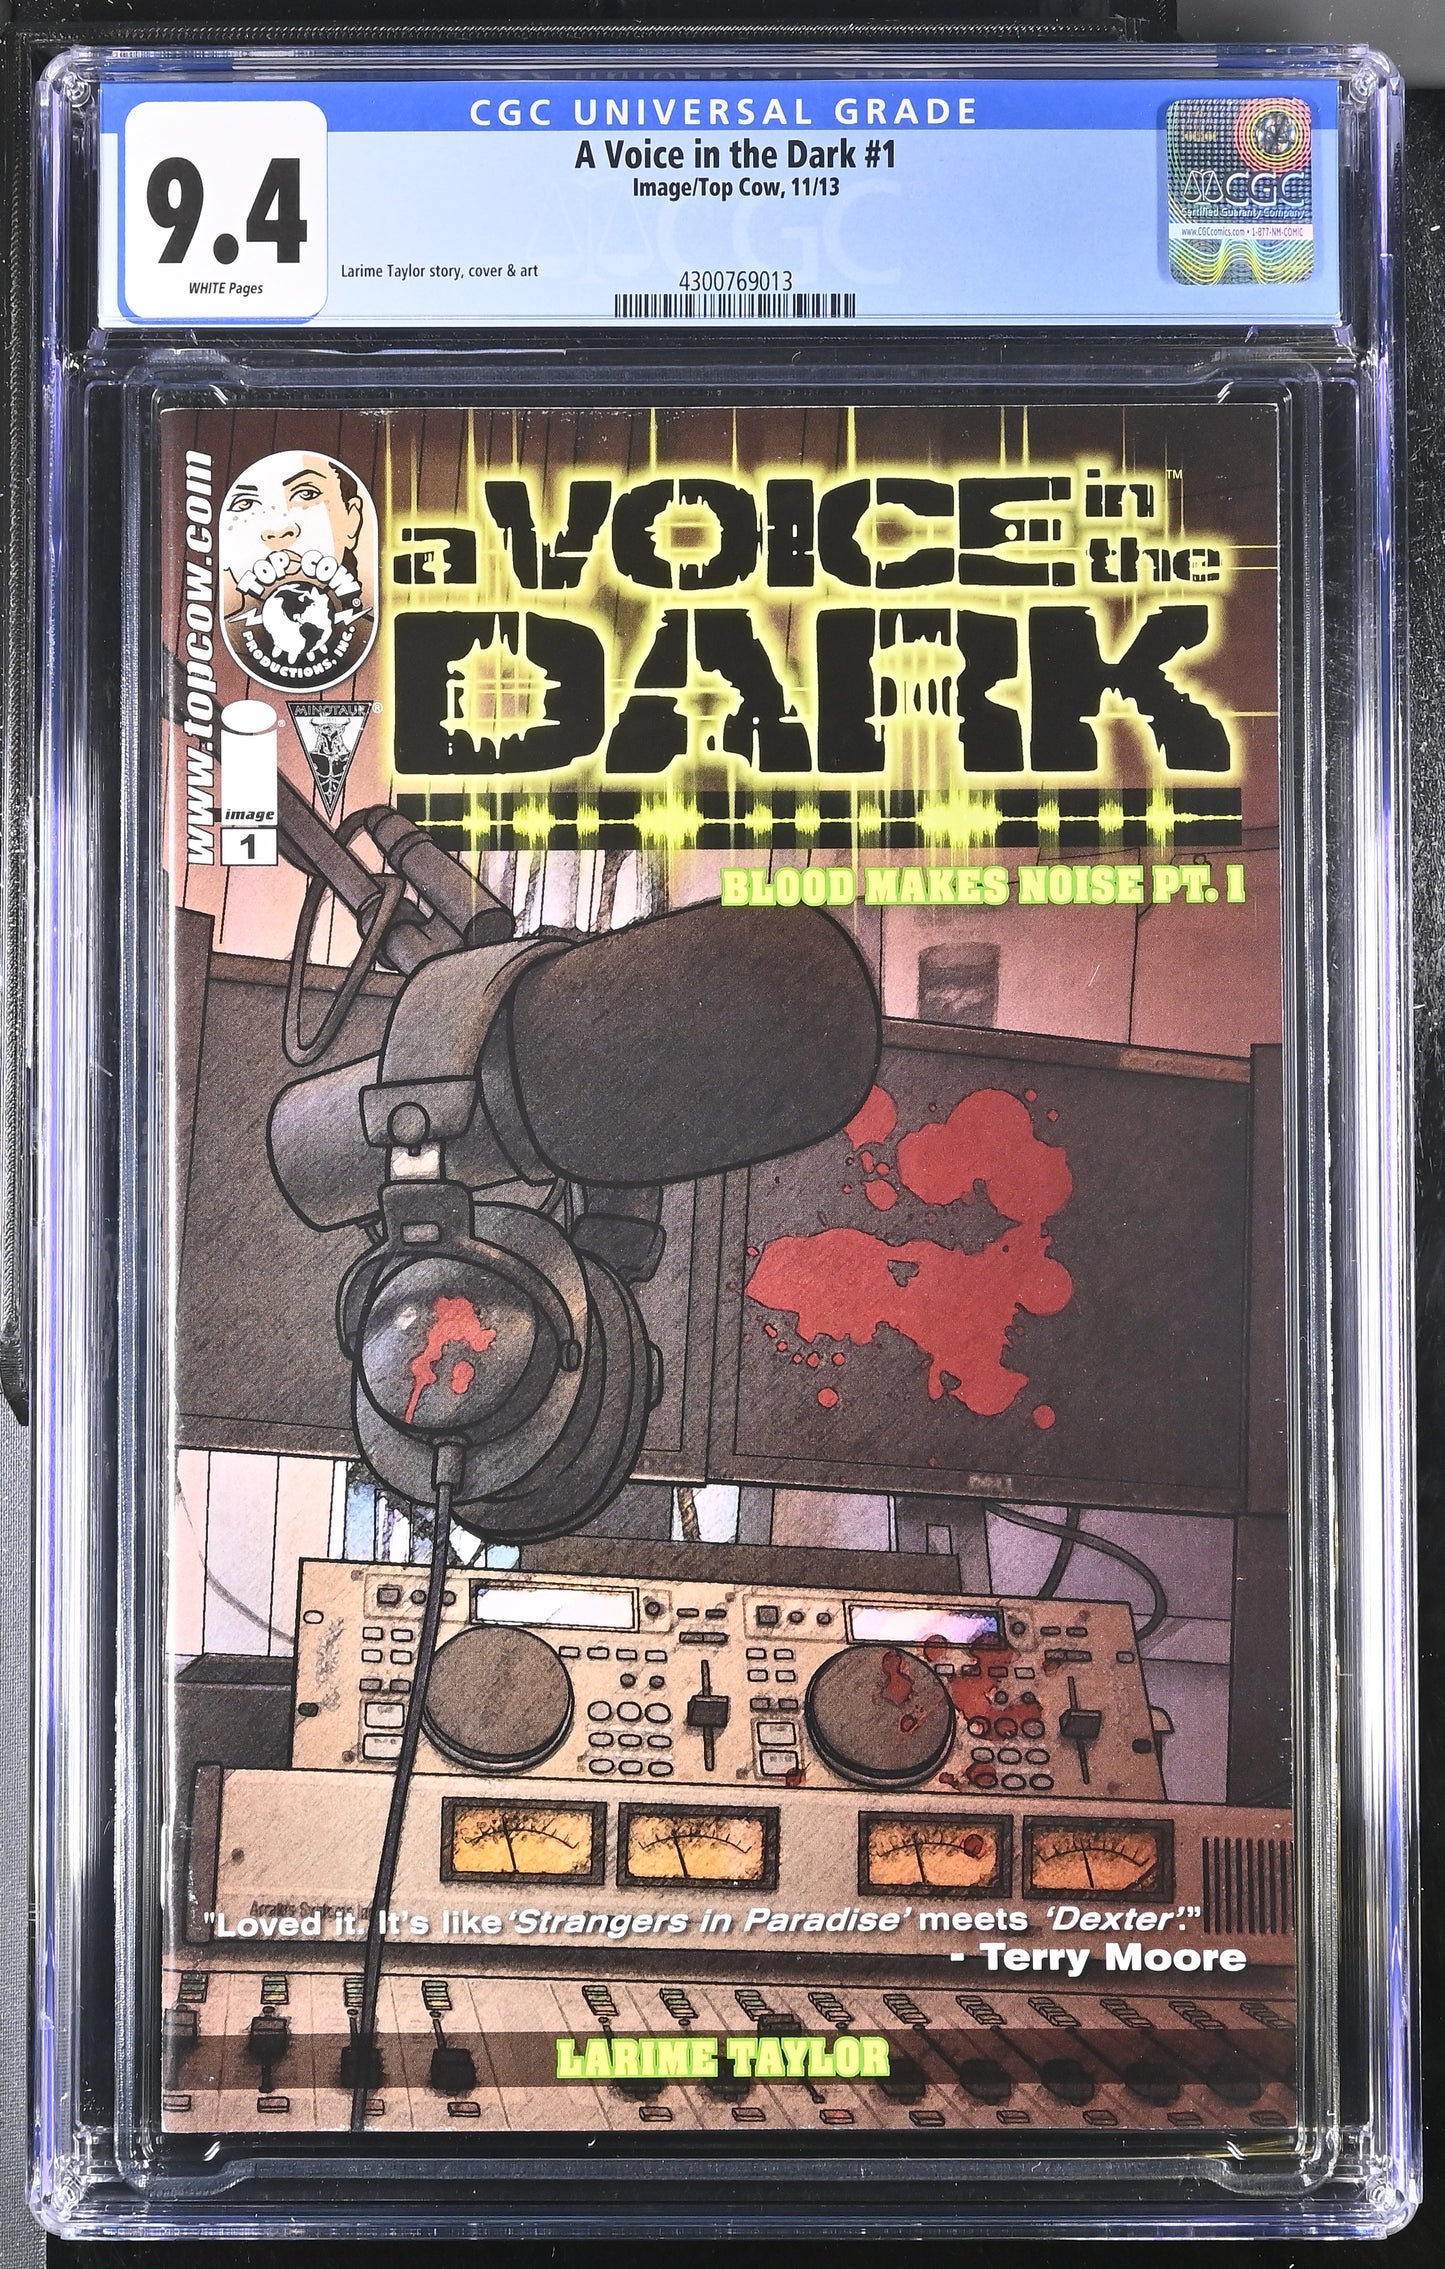 A Voice in the Dark #1  Image Comic Top Cow 11/13 CGC 9.4 White Pages